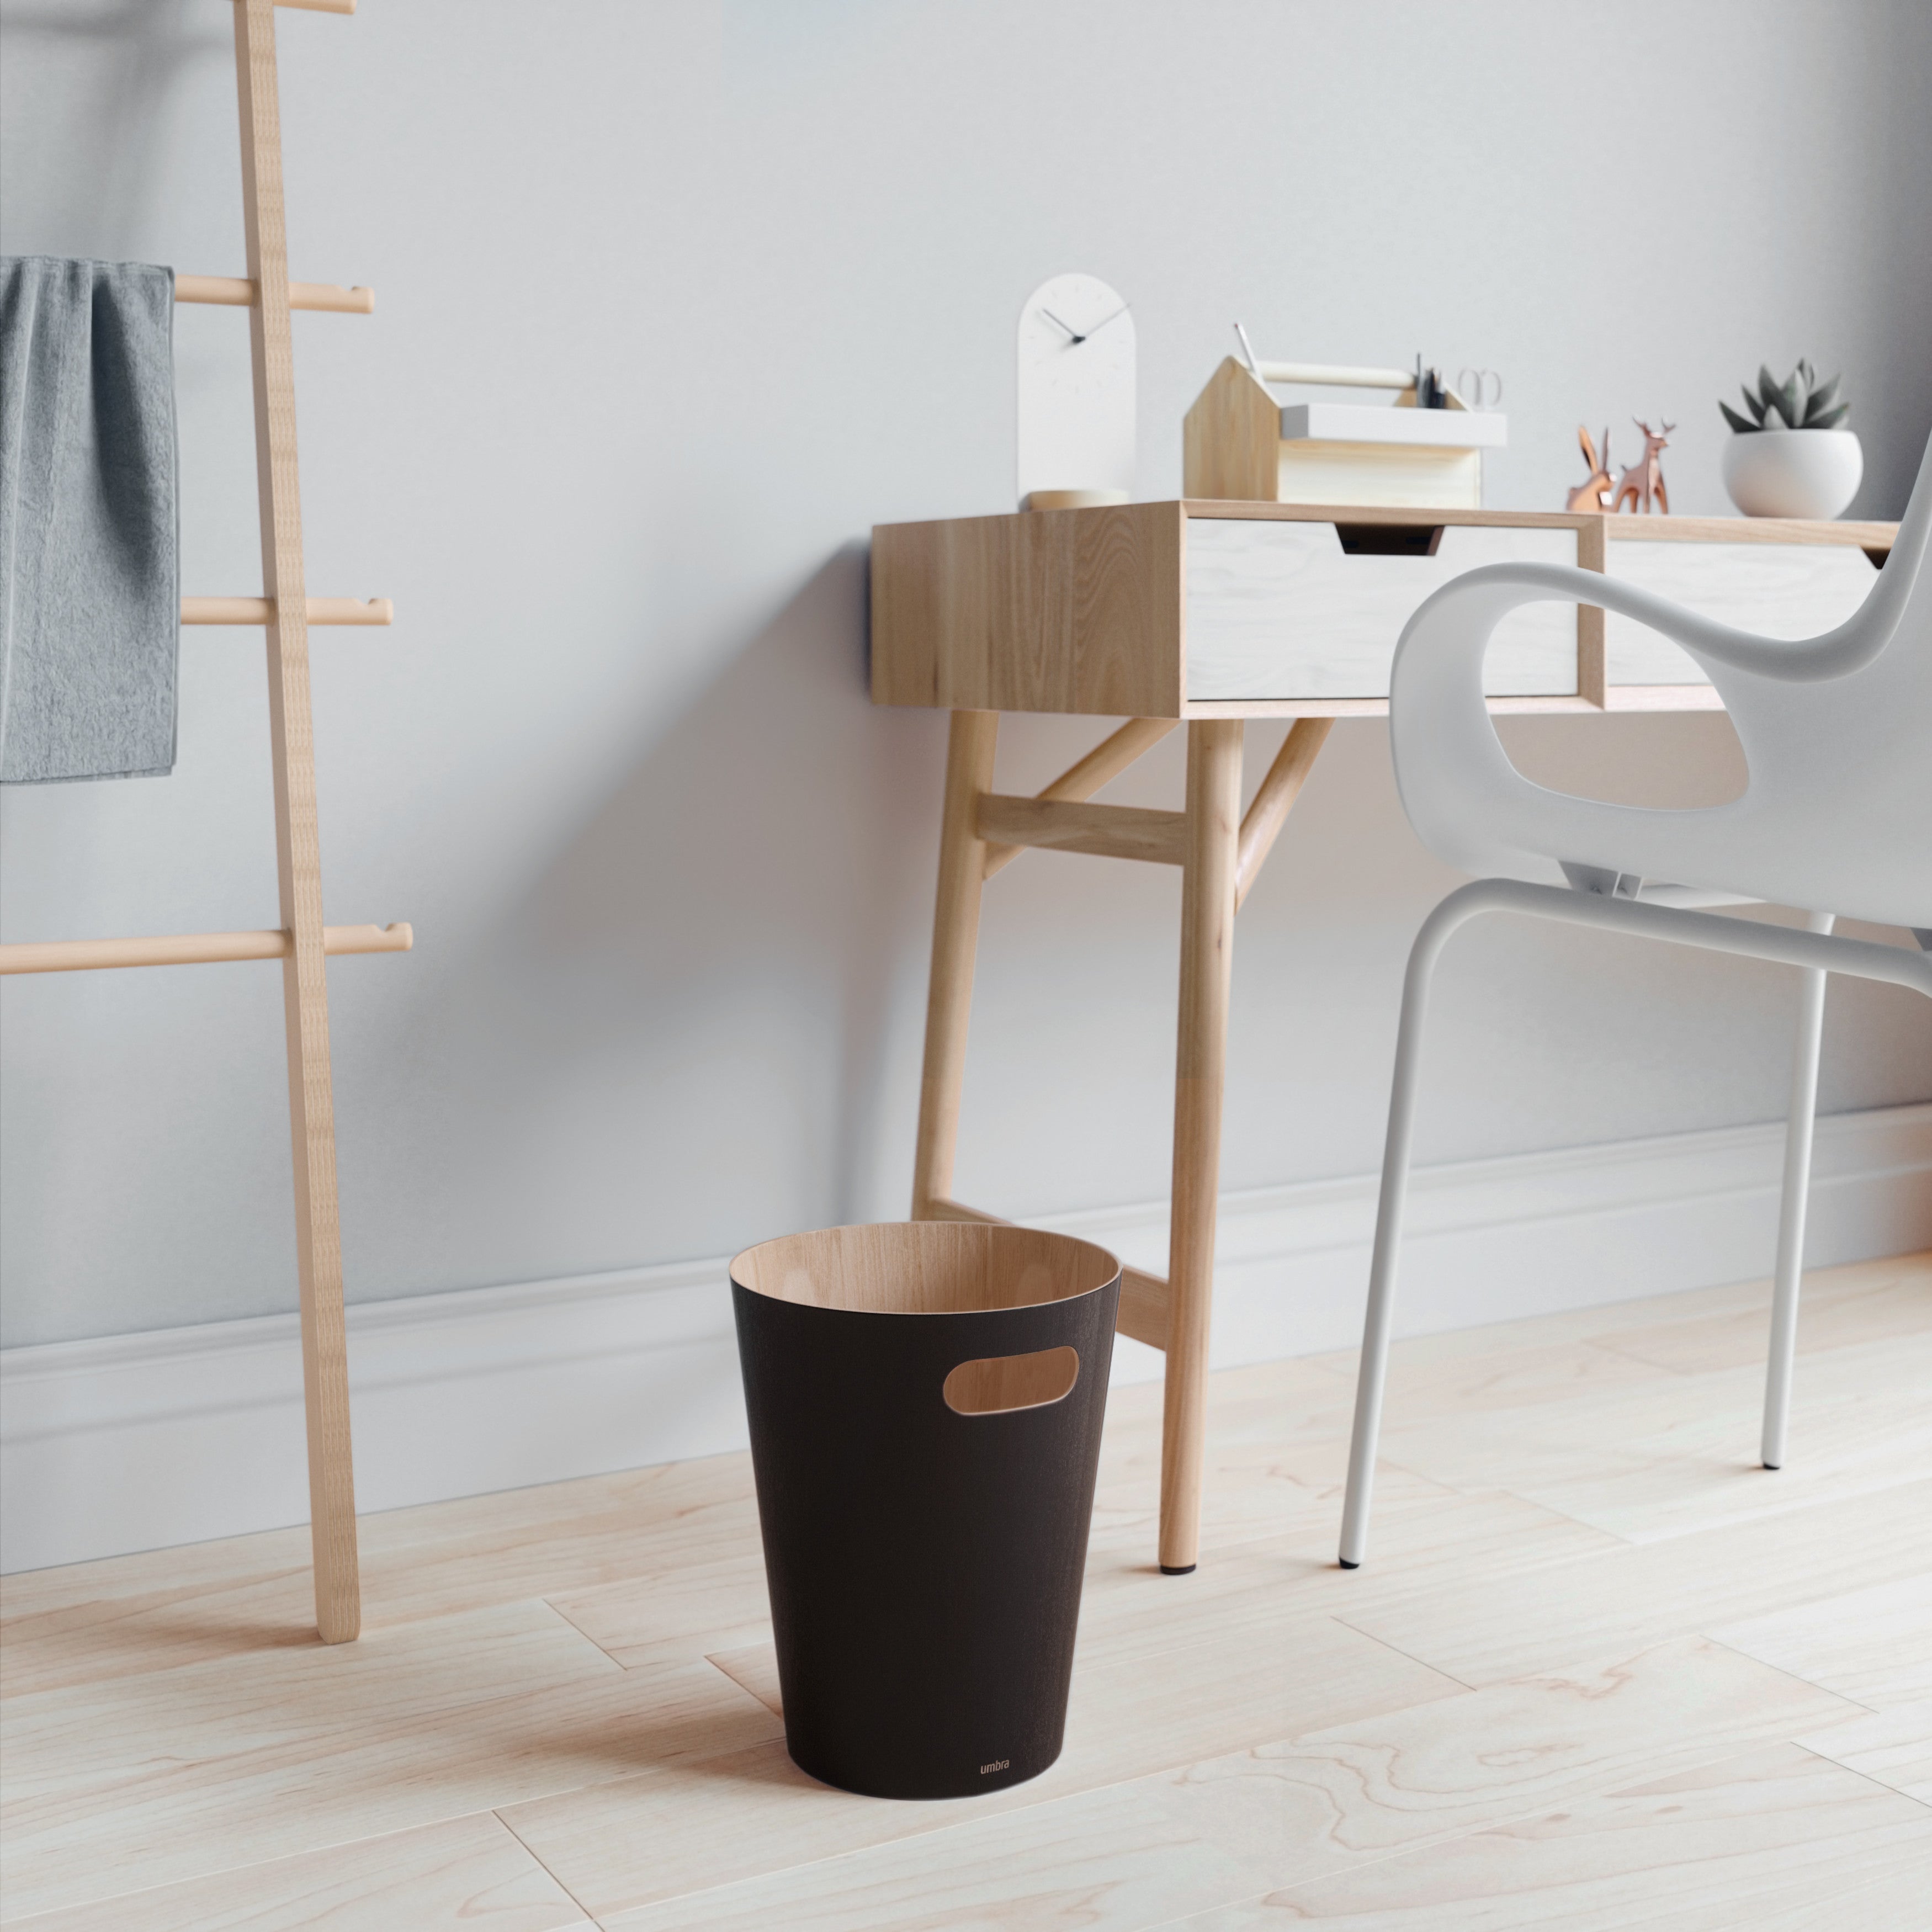 Woodrow Trash Can | Upgrade Your Space with This Modern Waste Can 